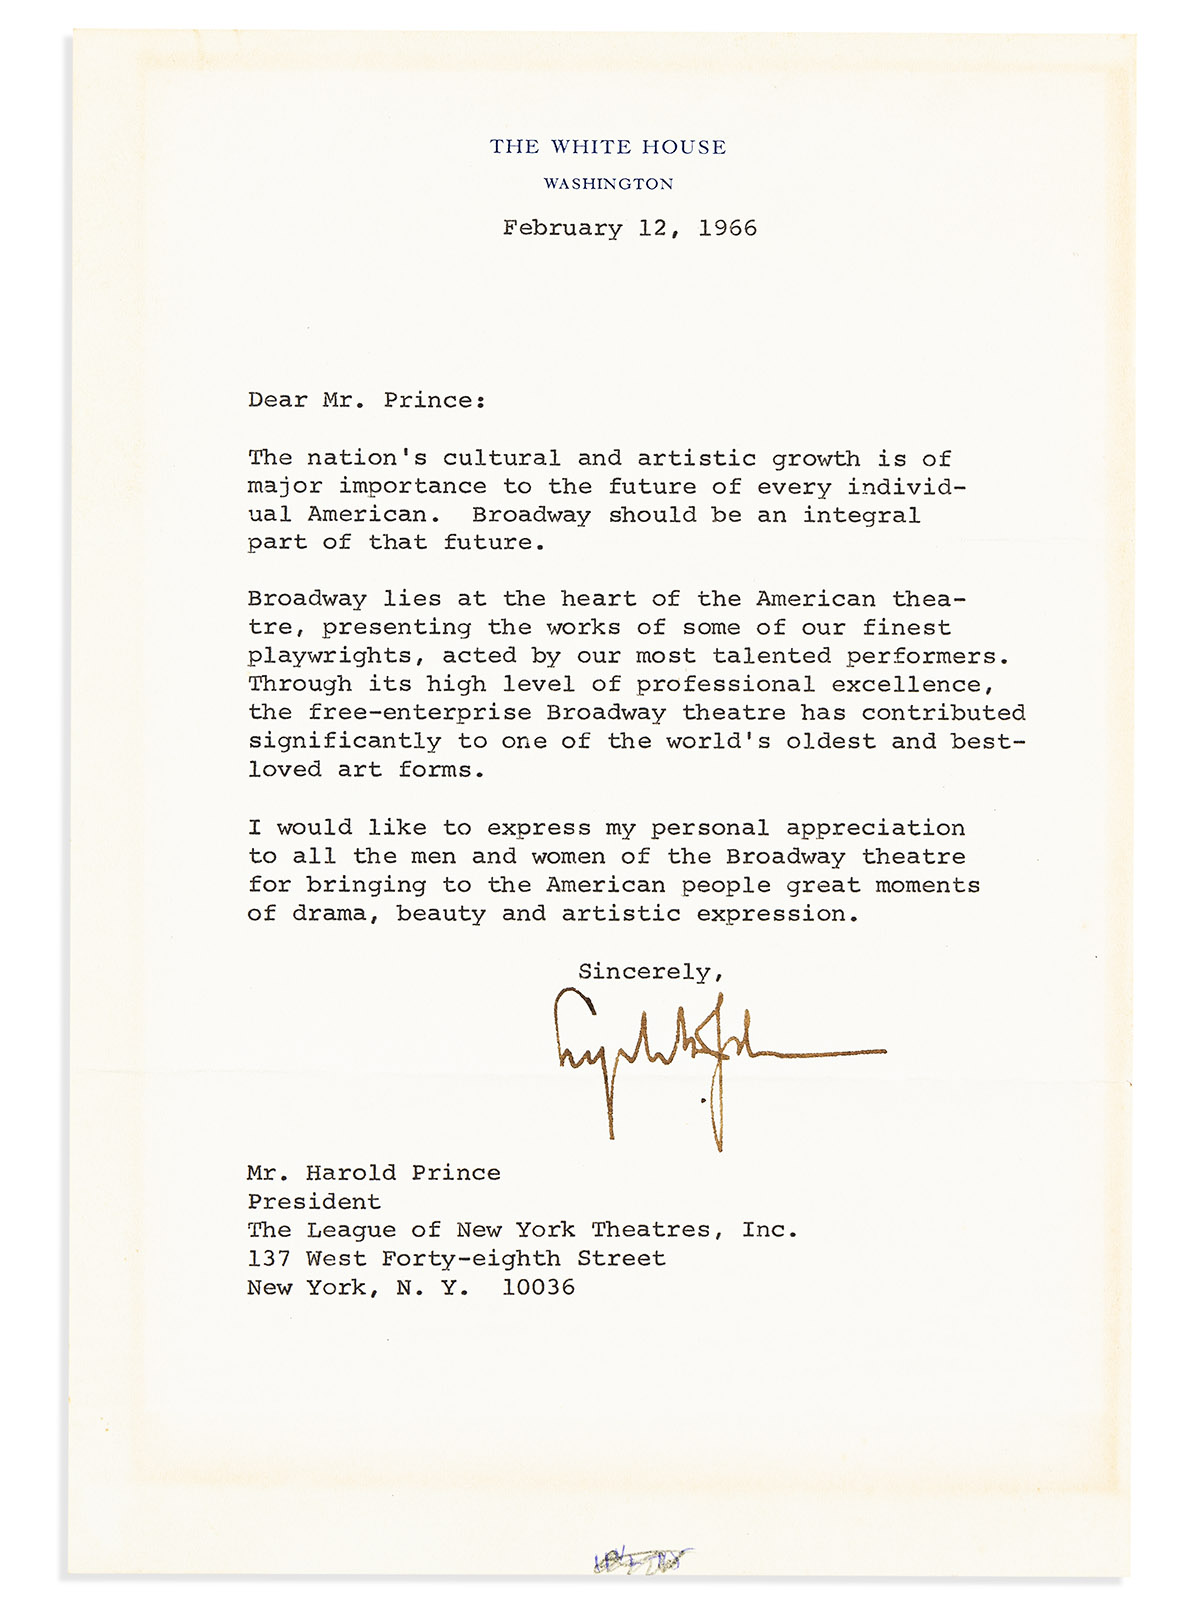 JOHNSON, LYNDON B. Typed Letter Signed, as President, to Harold Prince and League of New York Theatres, expressing appreciation.